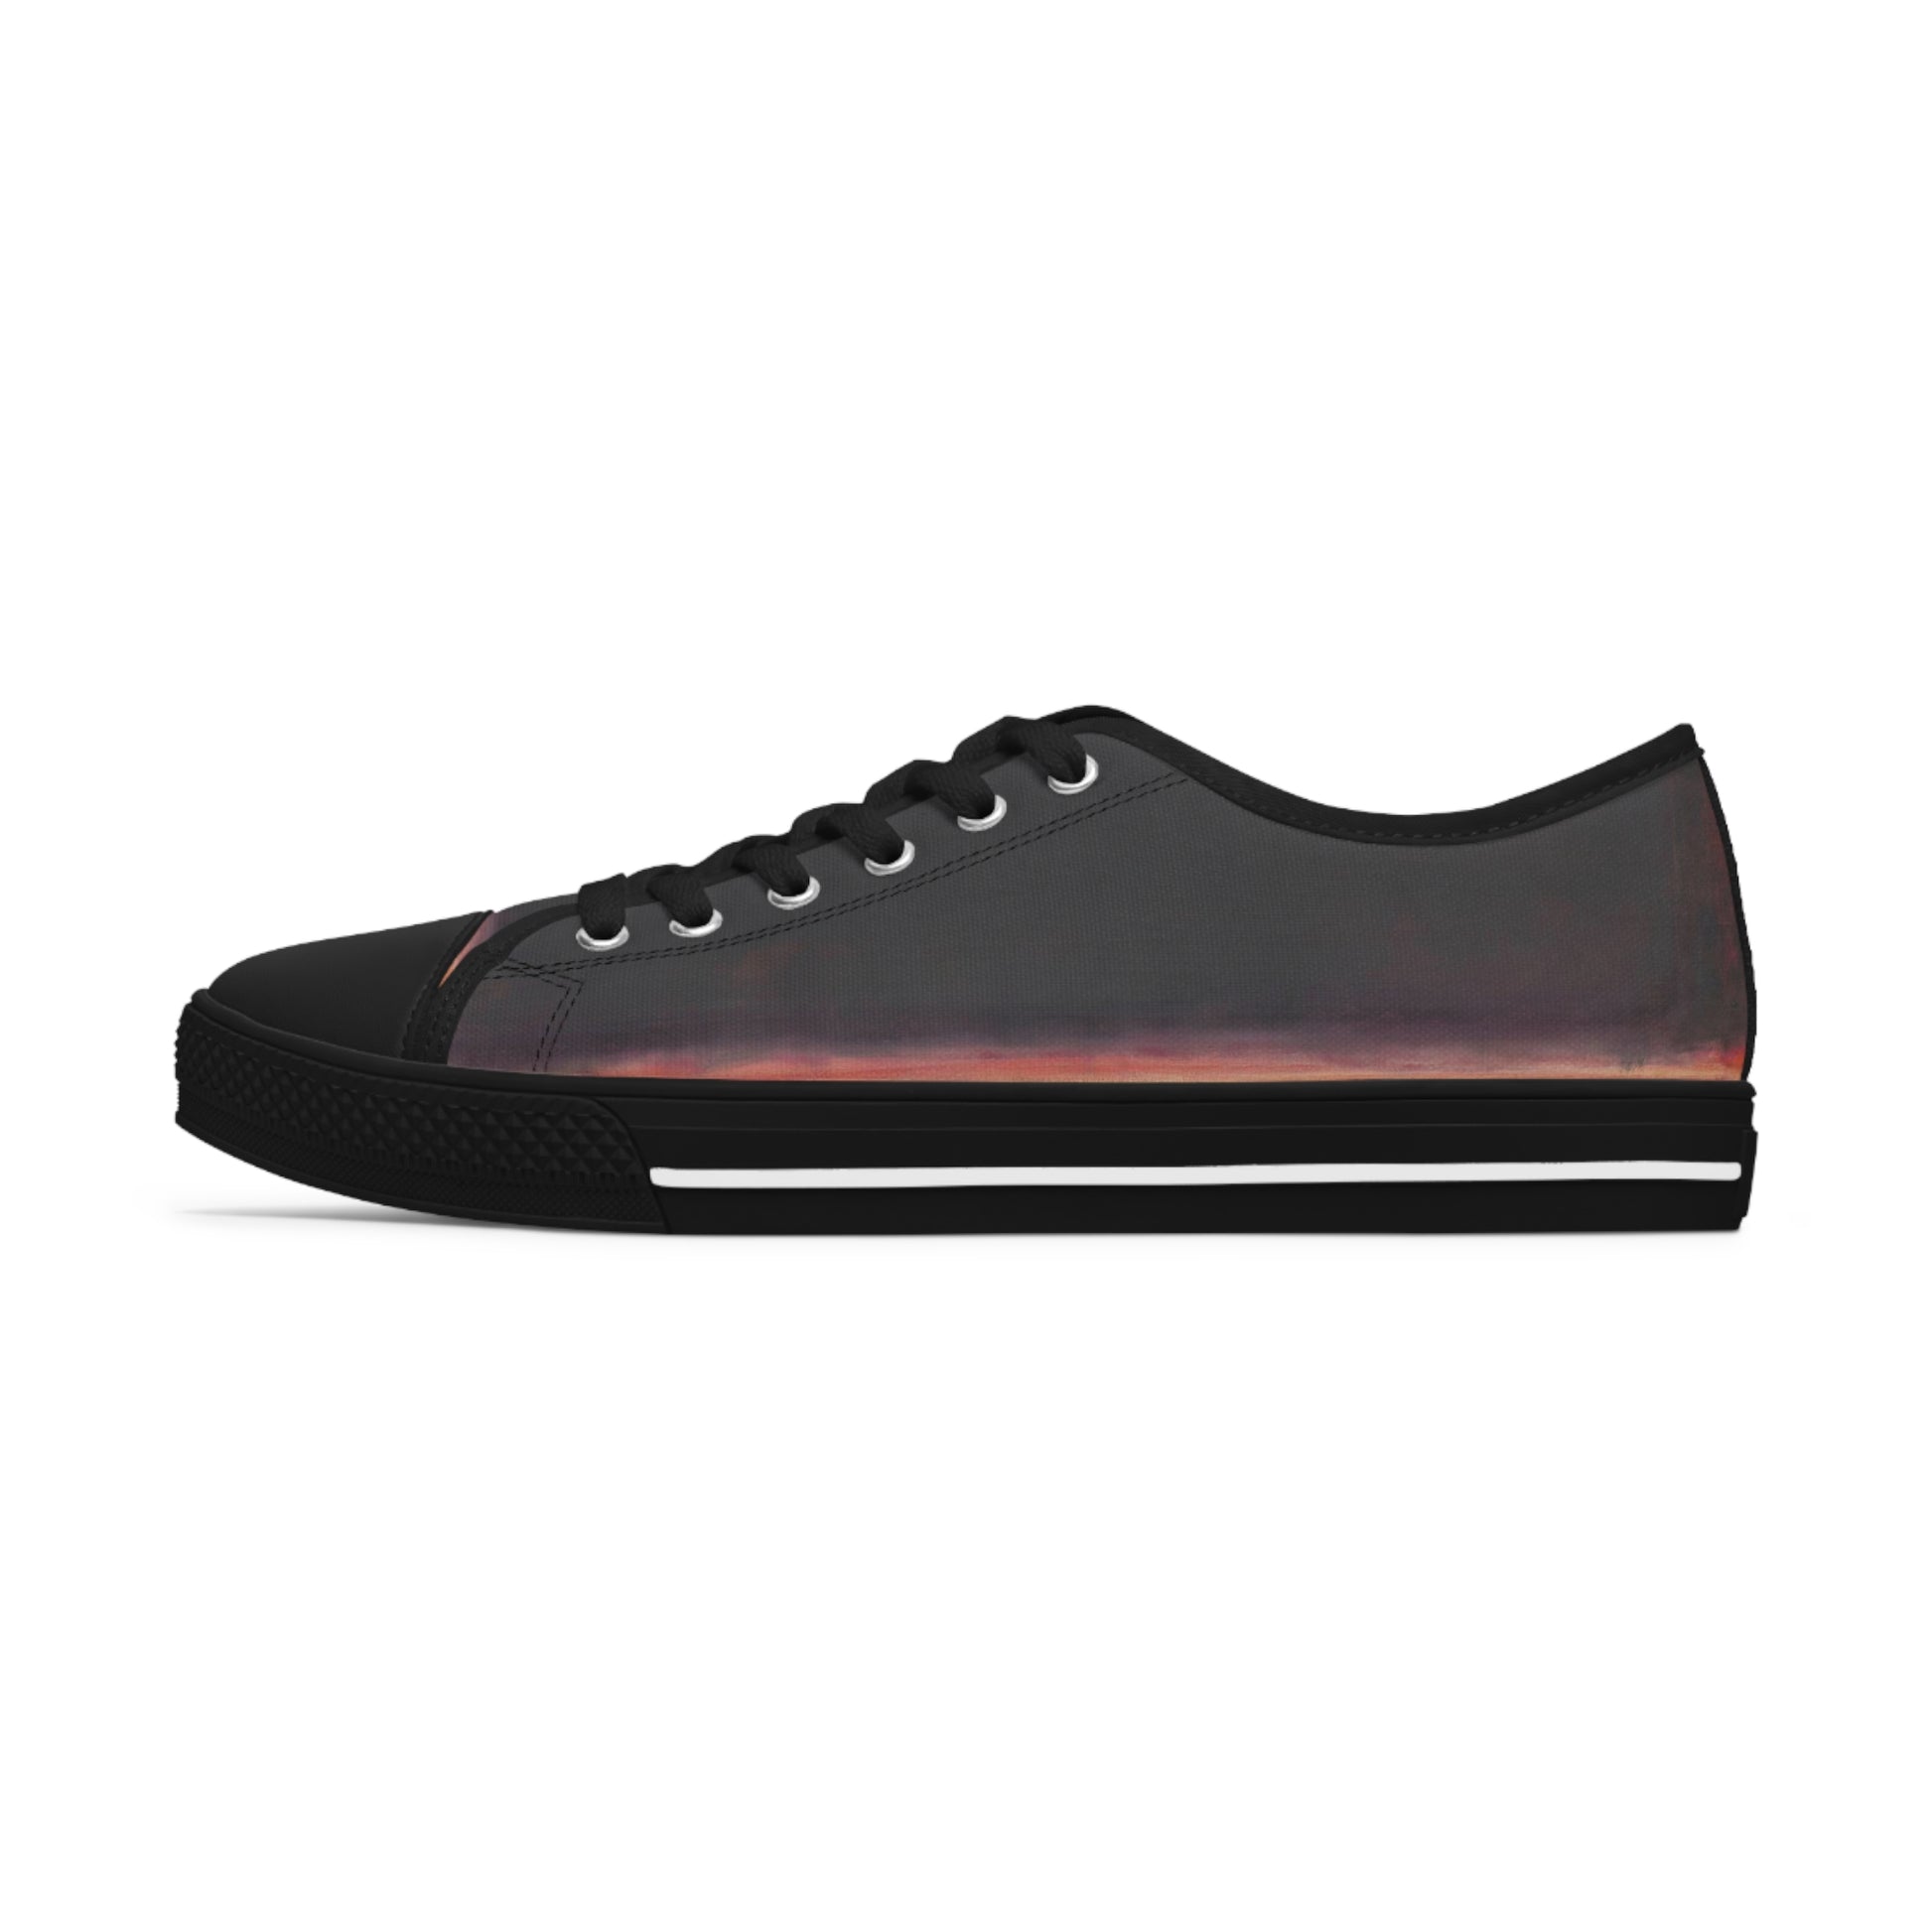 MARK ROTHKO - ABSTRACT - LOW TOP ART SNEAKERS 